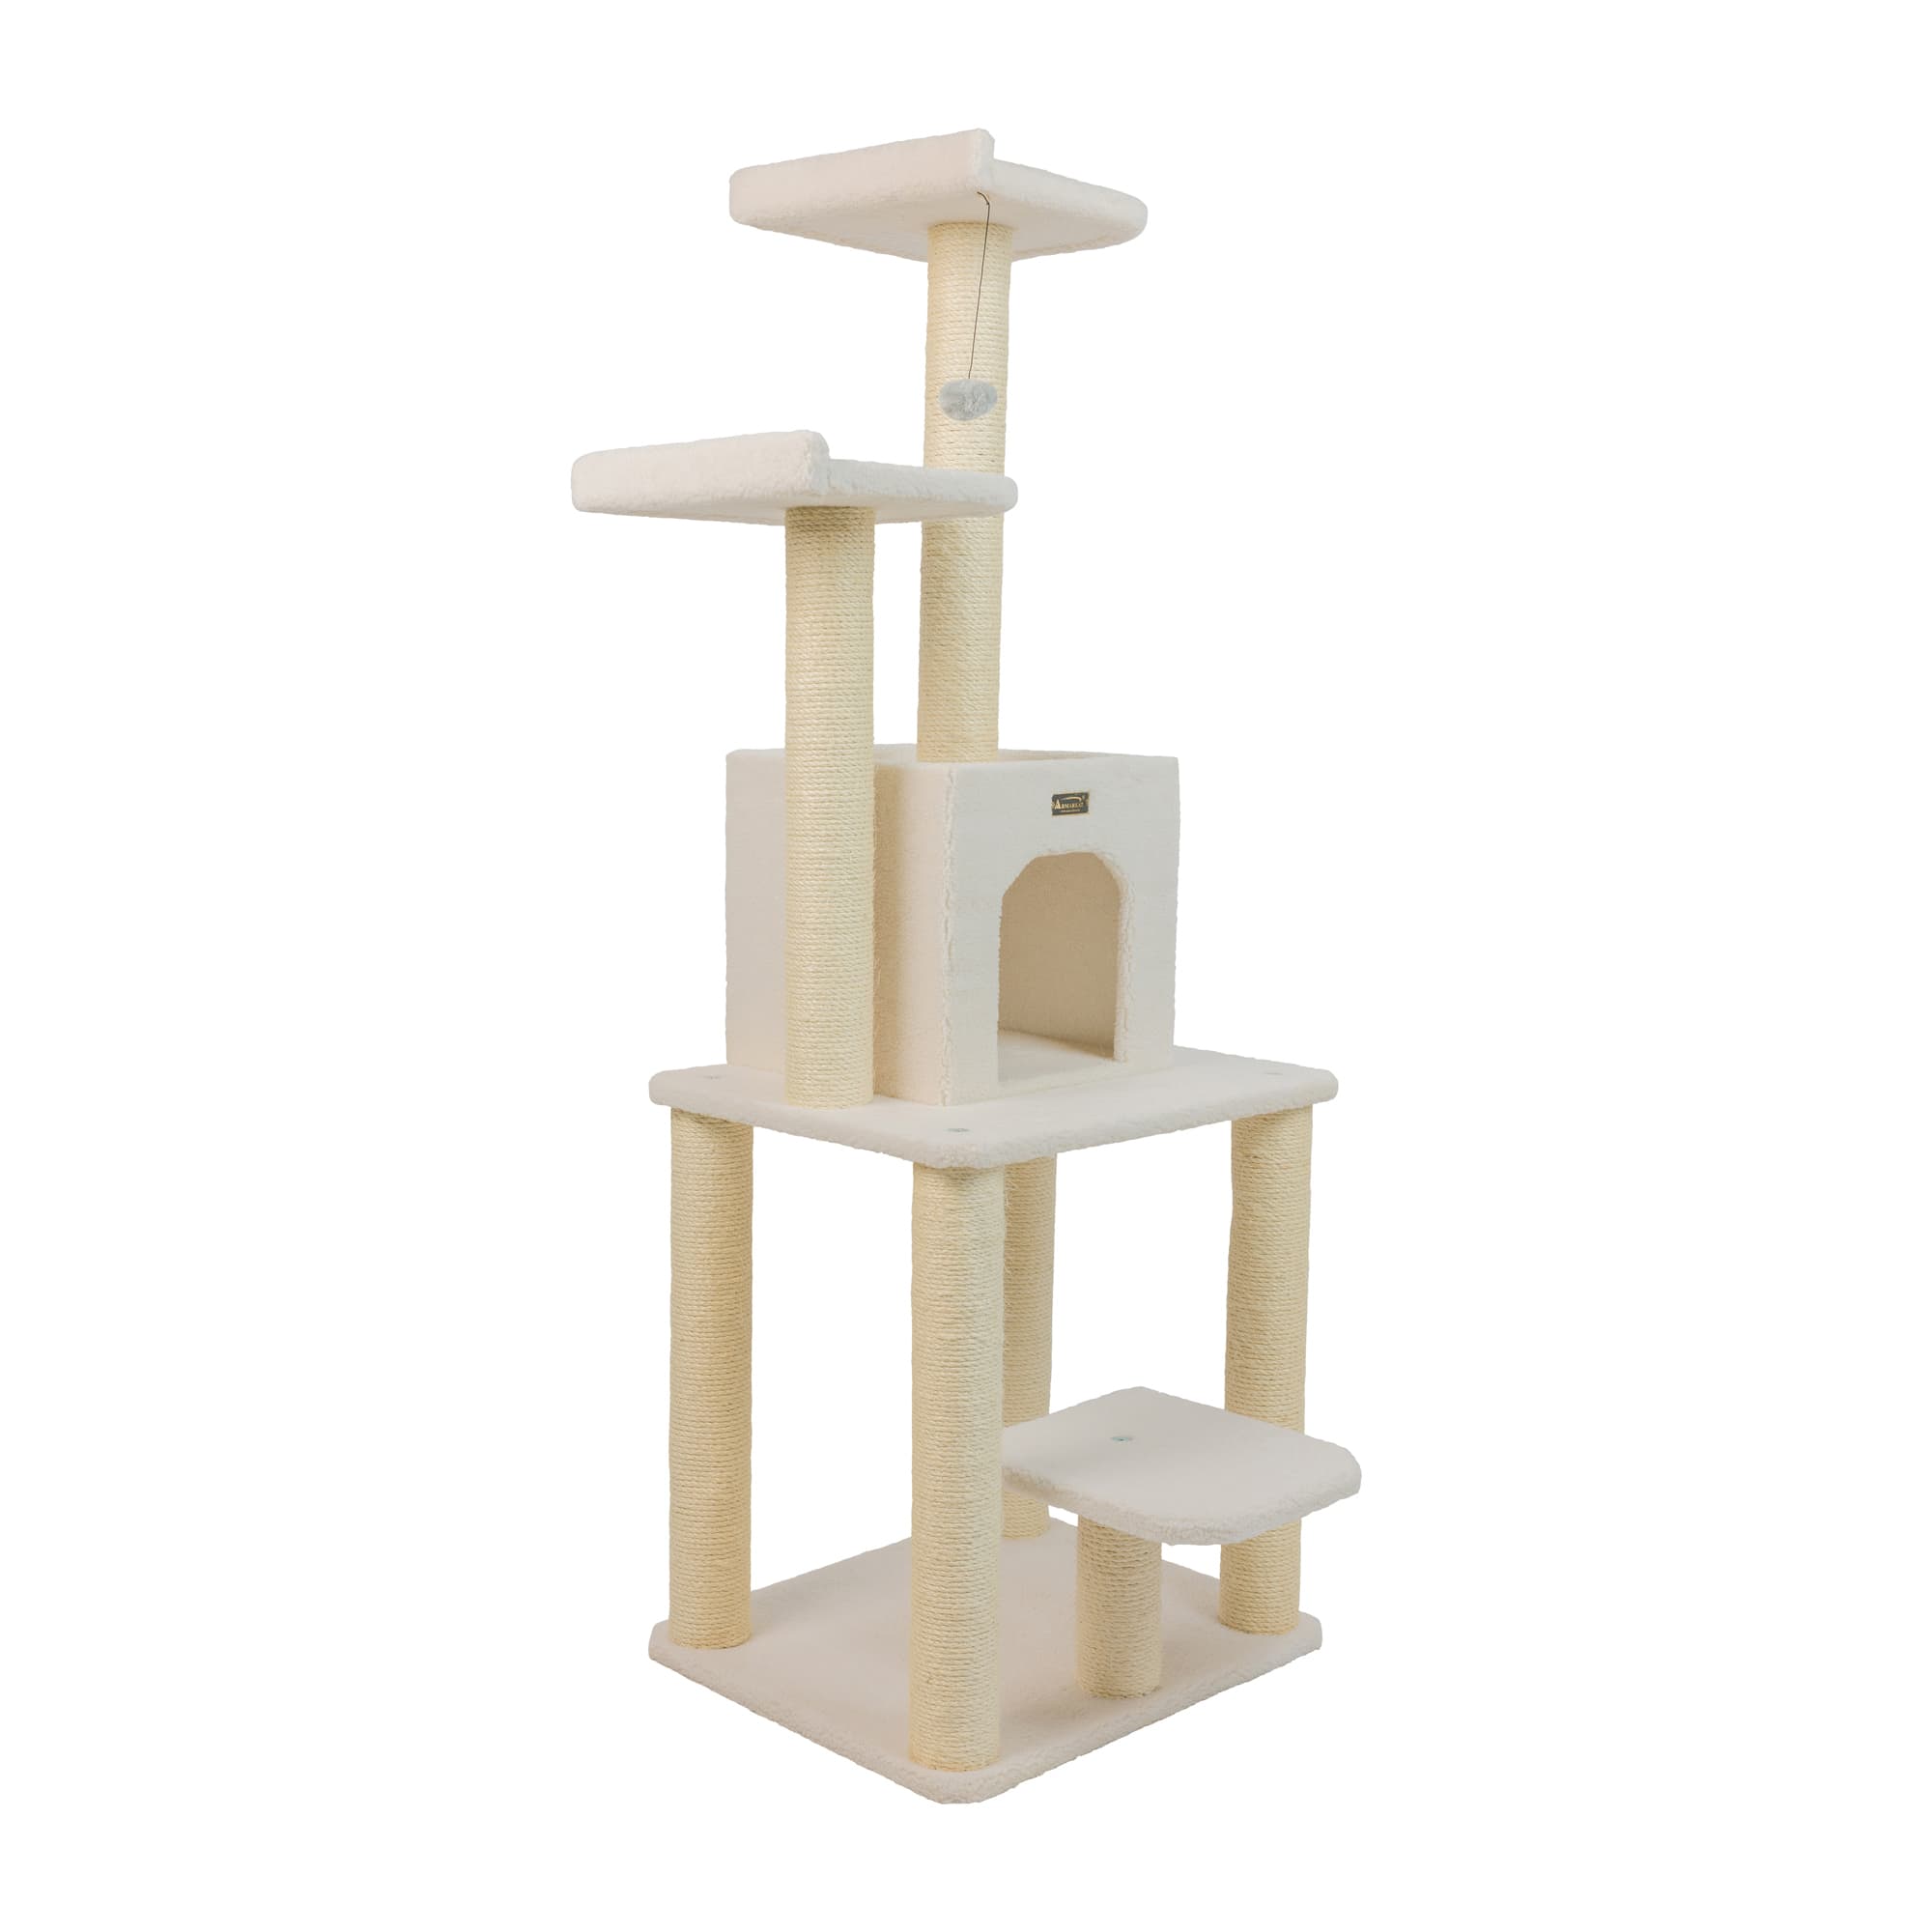 Photos - Other for Cats Armarkat Classic Model B6203 Real Wood Cat Tree, 62" H, 28 IN, Of 